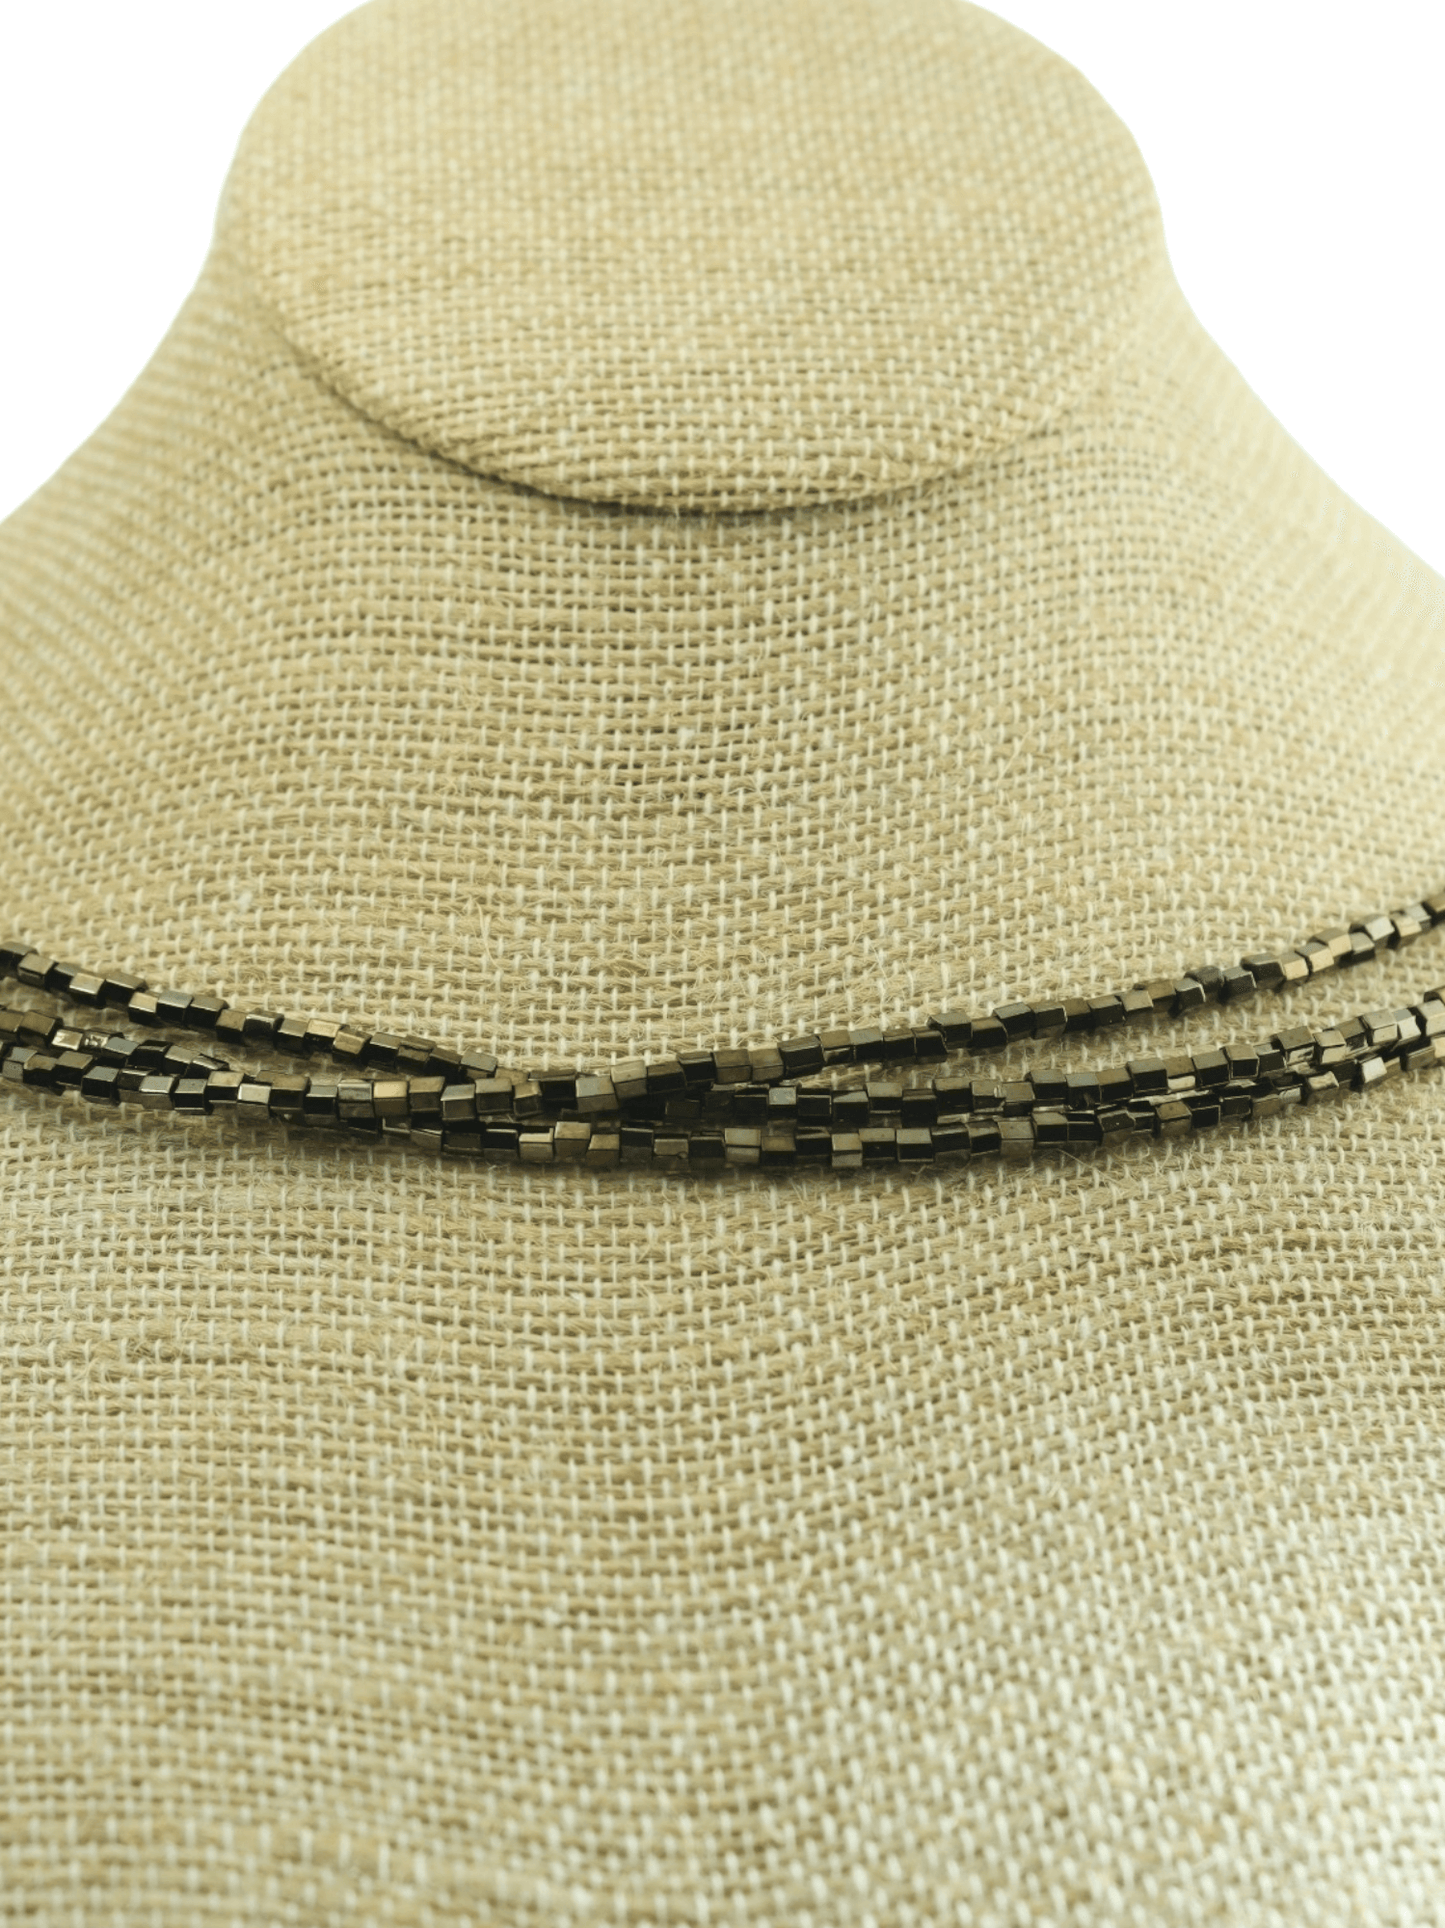 Bronze Multistrand Necklace - Close-up - Kaleidoscopes And Polka Dots